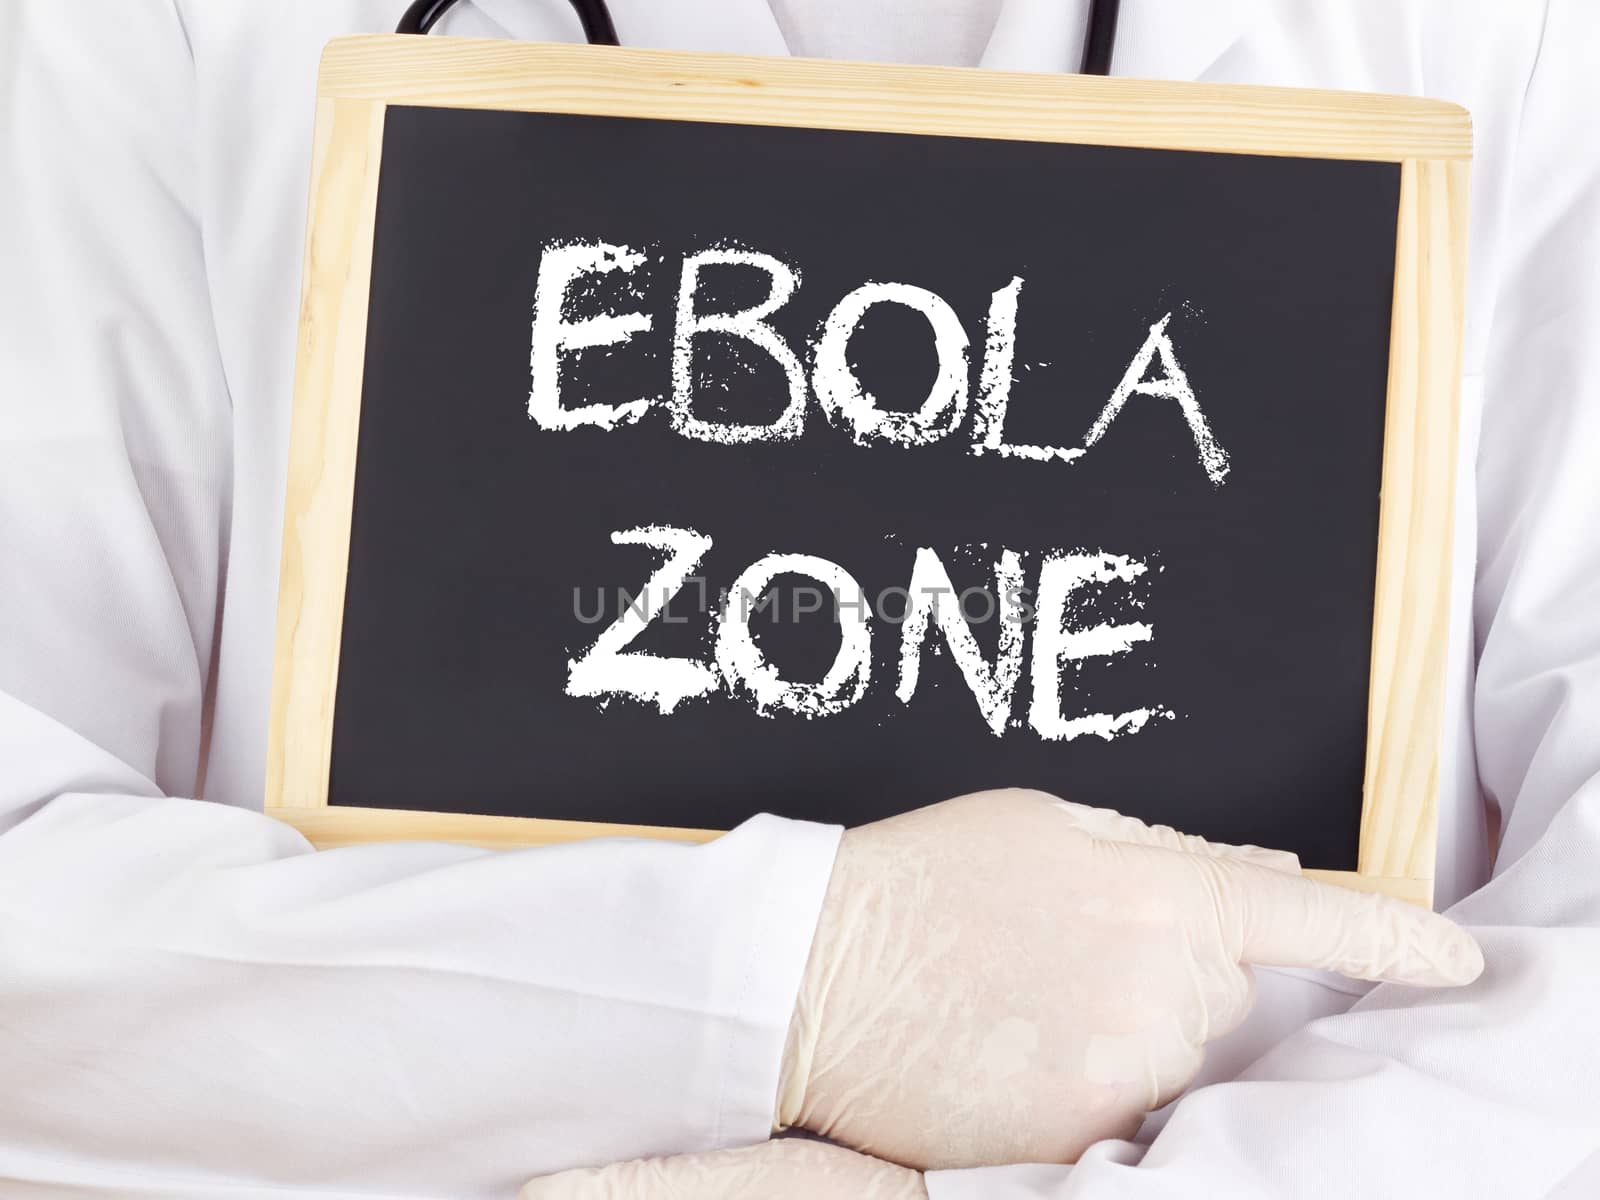 Doctor shows information: Ebola zone by gwolters